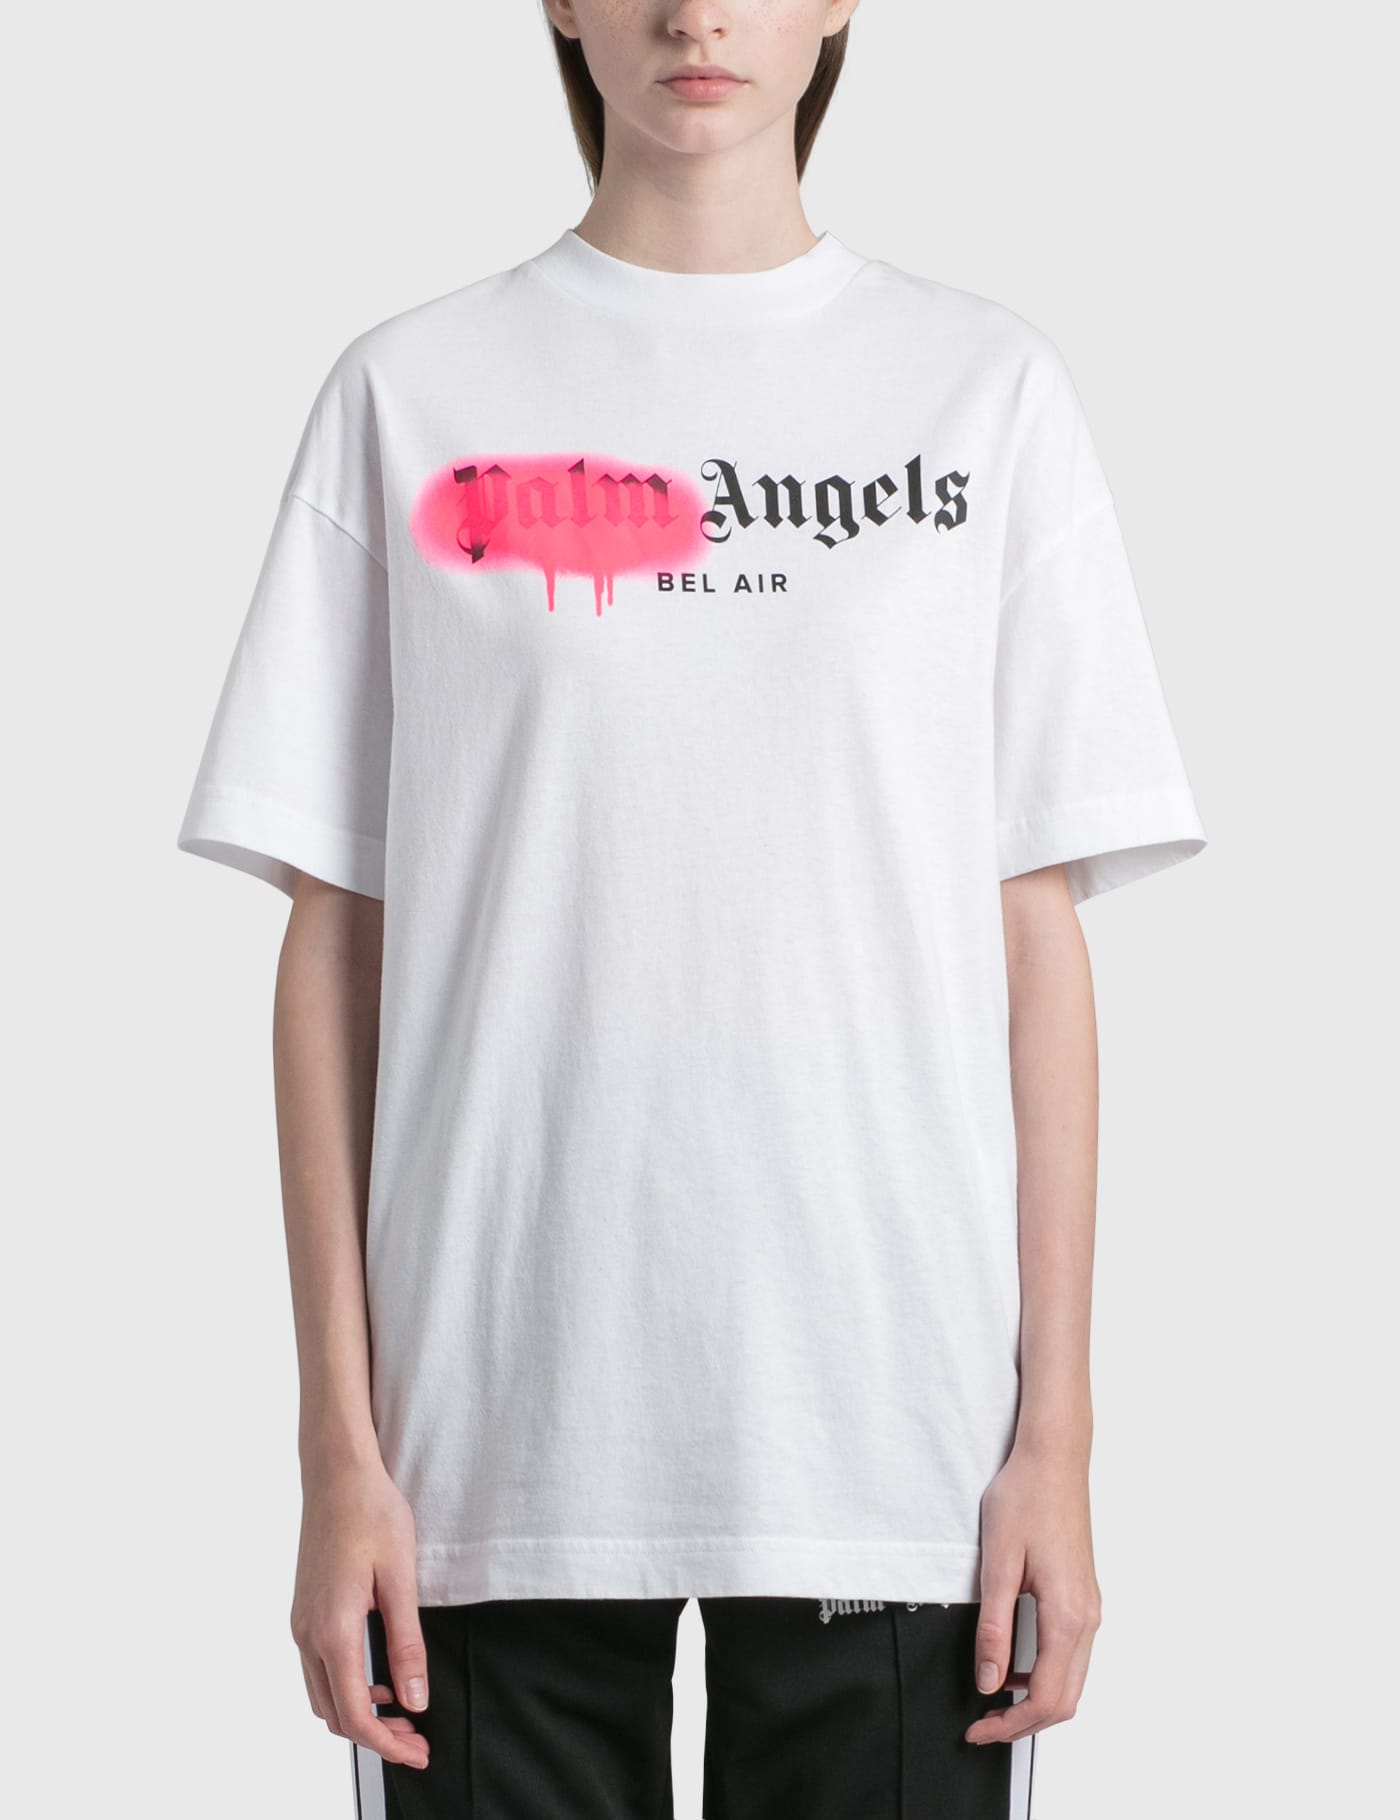 Palm Angels - Bel Air Sprayed T-Shirt | HBX - Globally Curated 